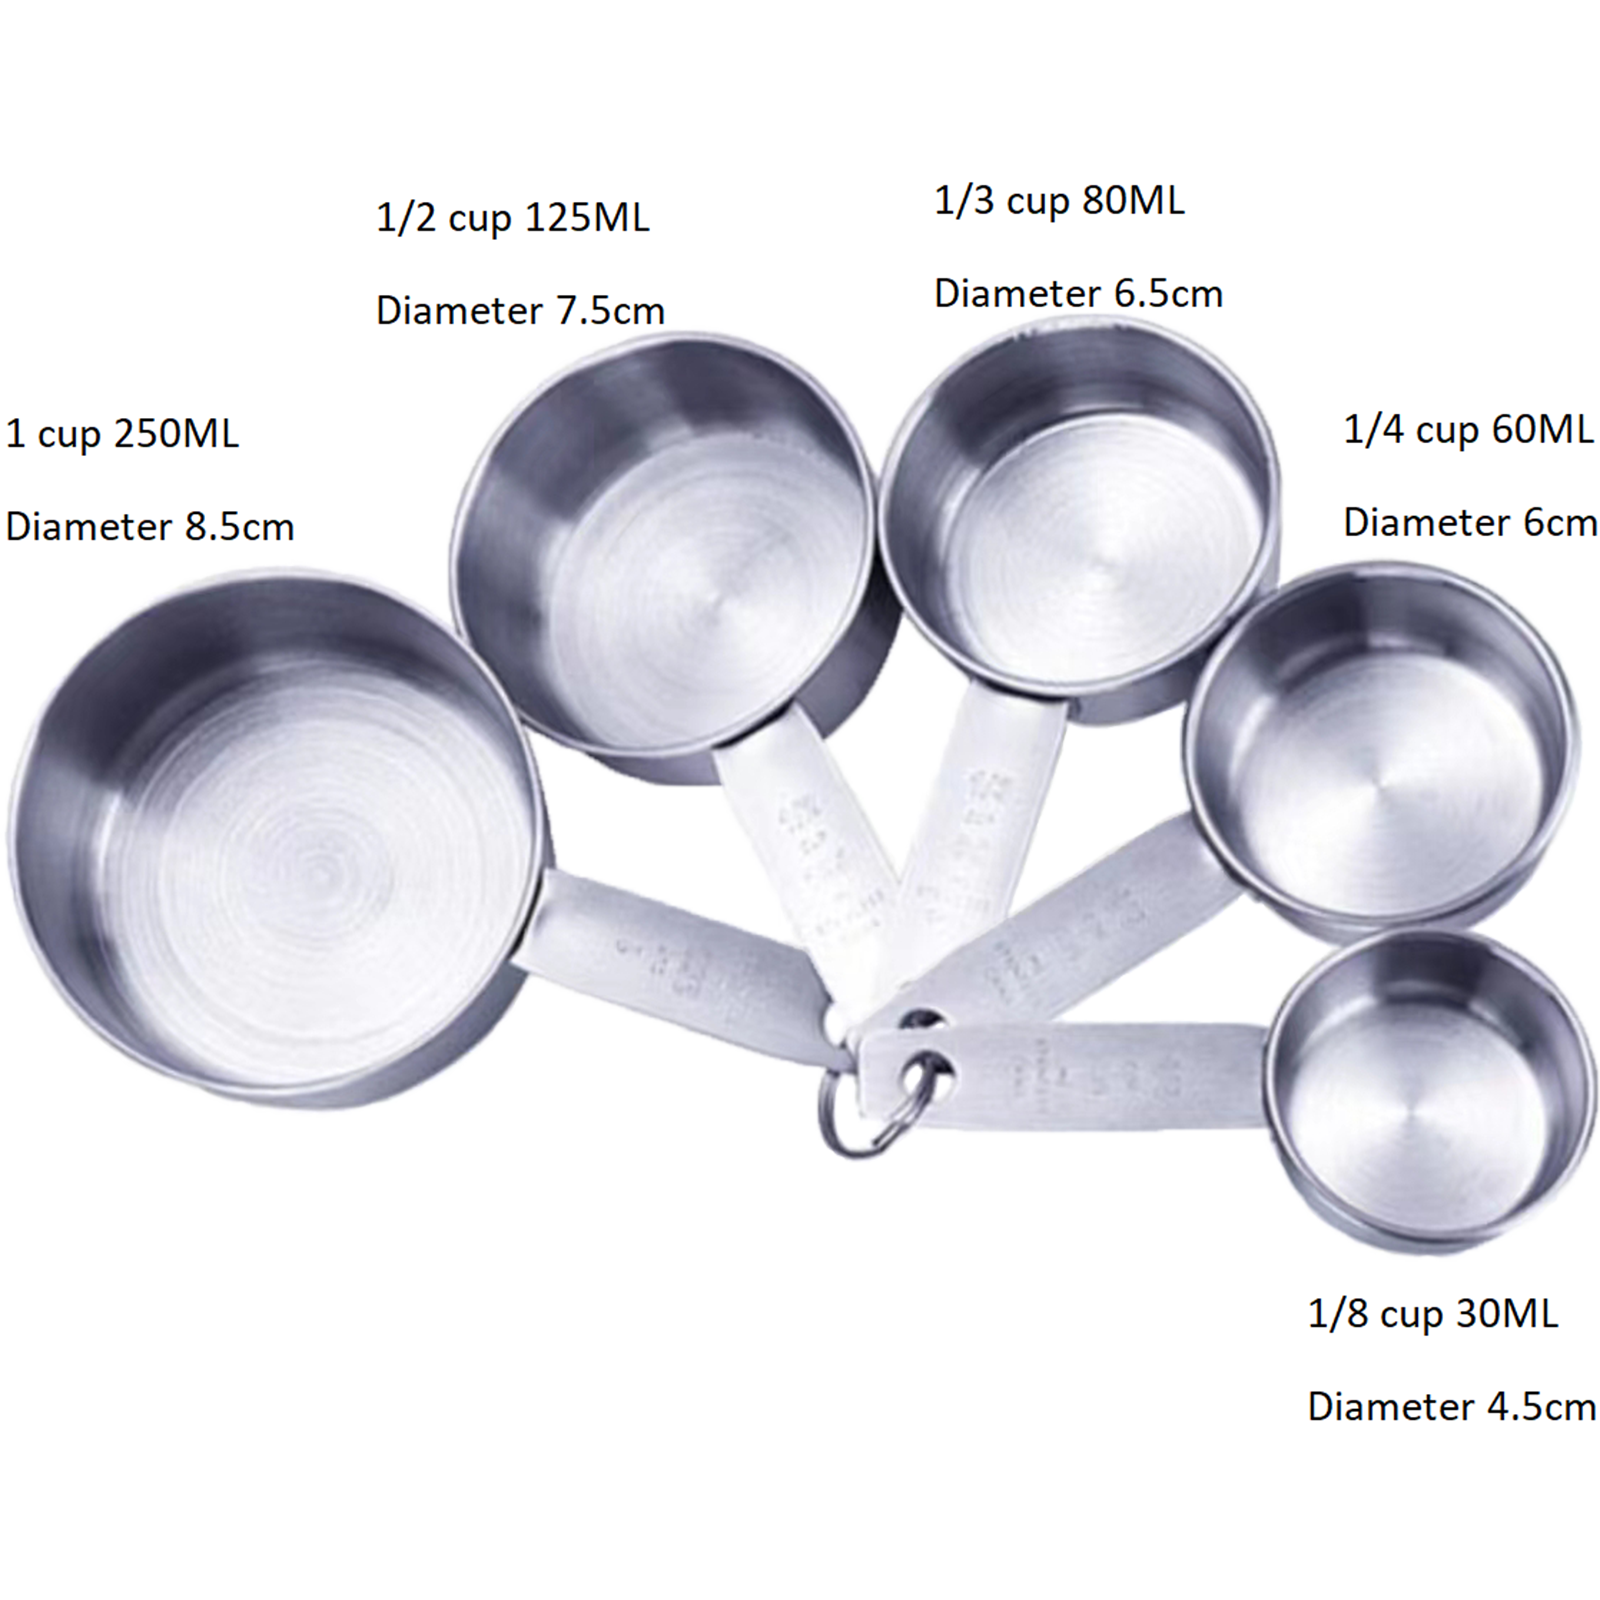 Measuring Cups and Spoons Set 11 Piece. Includes 10 Stainless Steel  Measuring Spoons and Cups Set and 1 Plastic Measuring Cup. Liquid Measuring  Cups